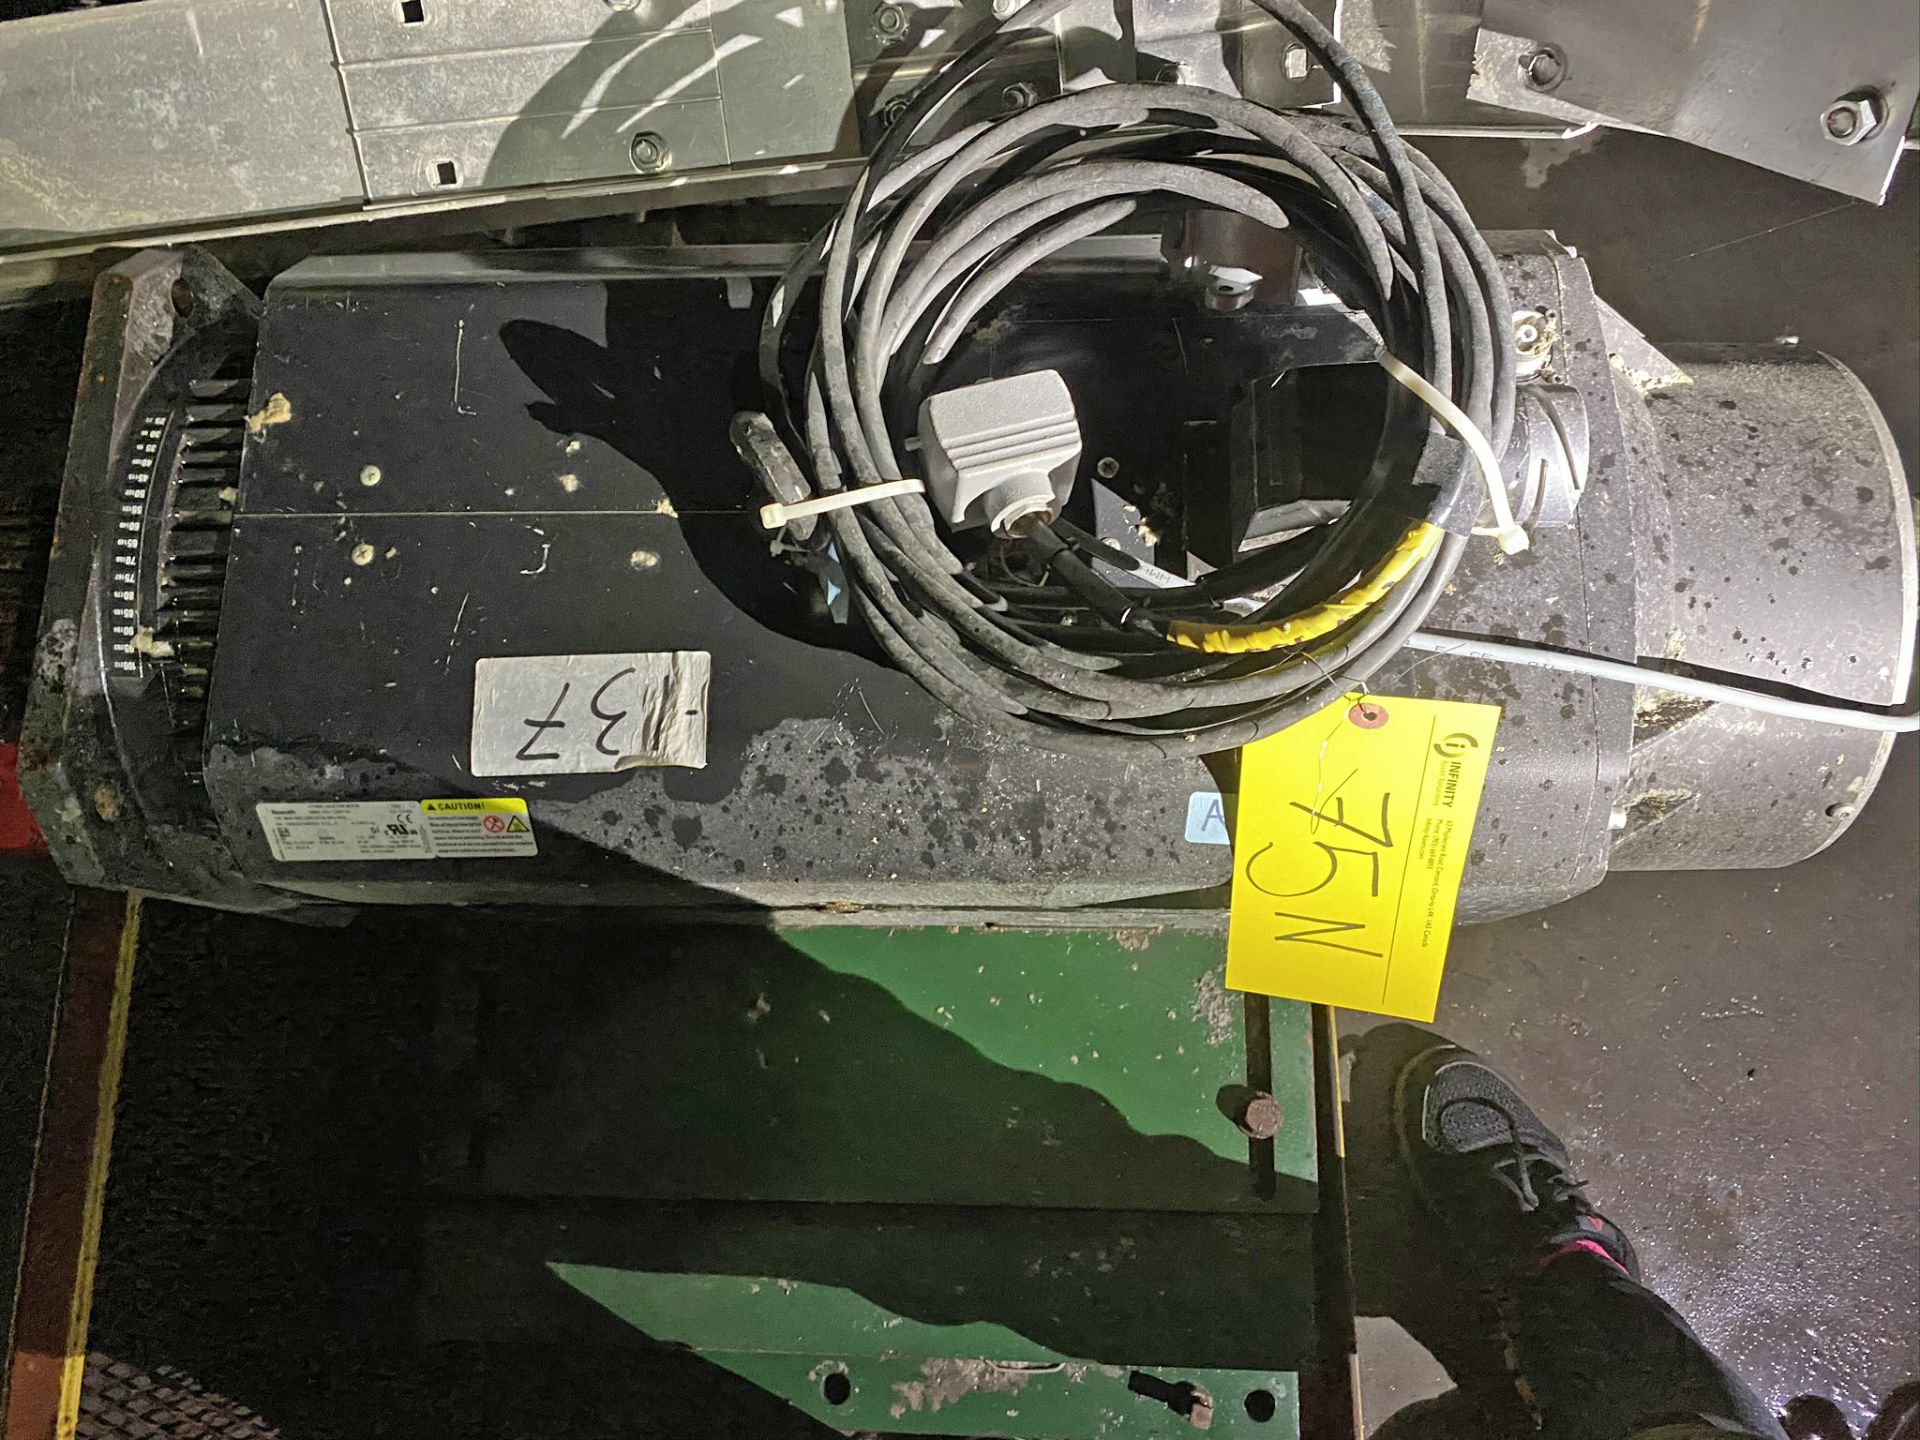 Rexroth 3-phase induction motor. Typ: MAD160C-020-S2-BK0-35-N1. S/N: 78002010000254. (S.F.)